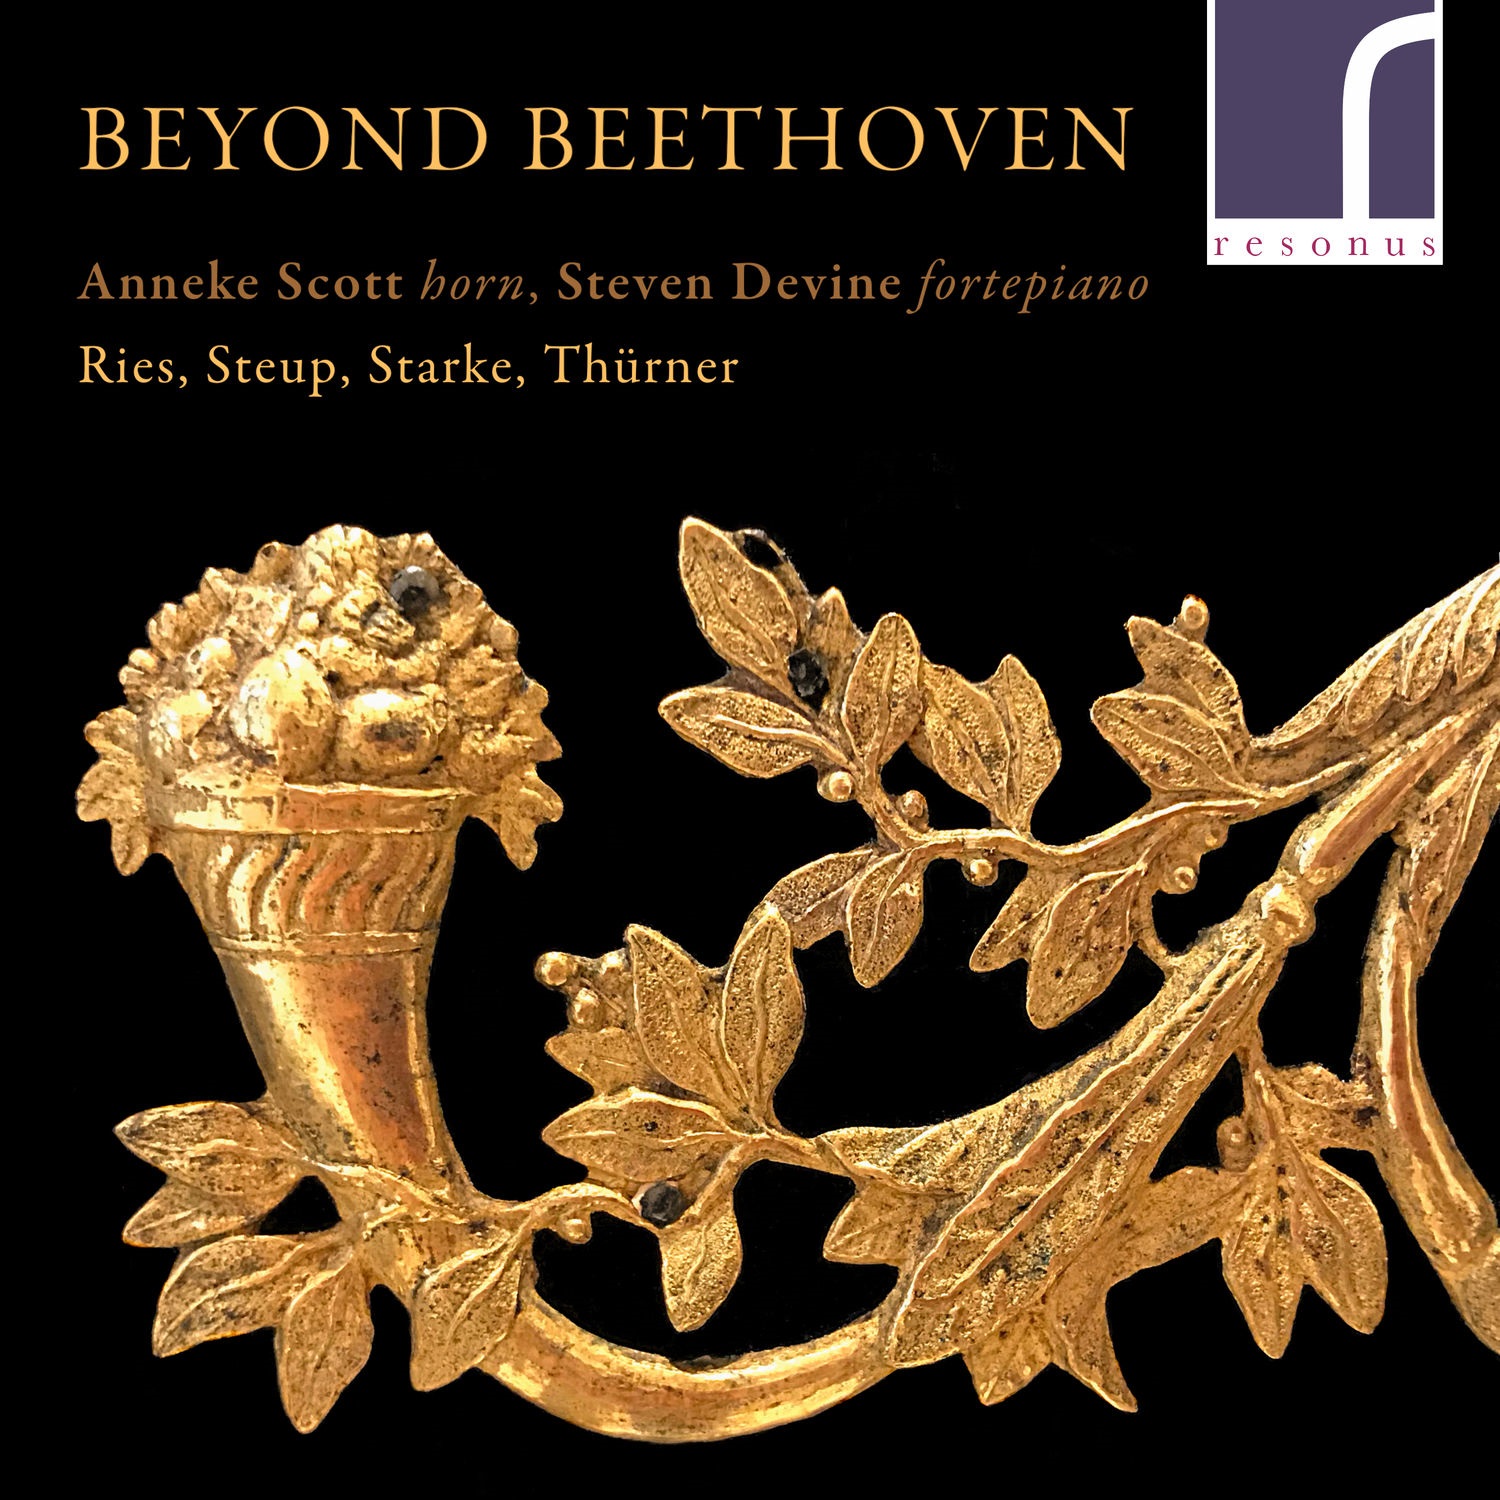 Anneke Scott & Steven Devine – Beyond Beethoven: Works for Natural Horn and Fortepiano (2021) [FLAC 24bit/96kHz]